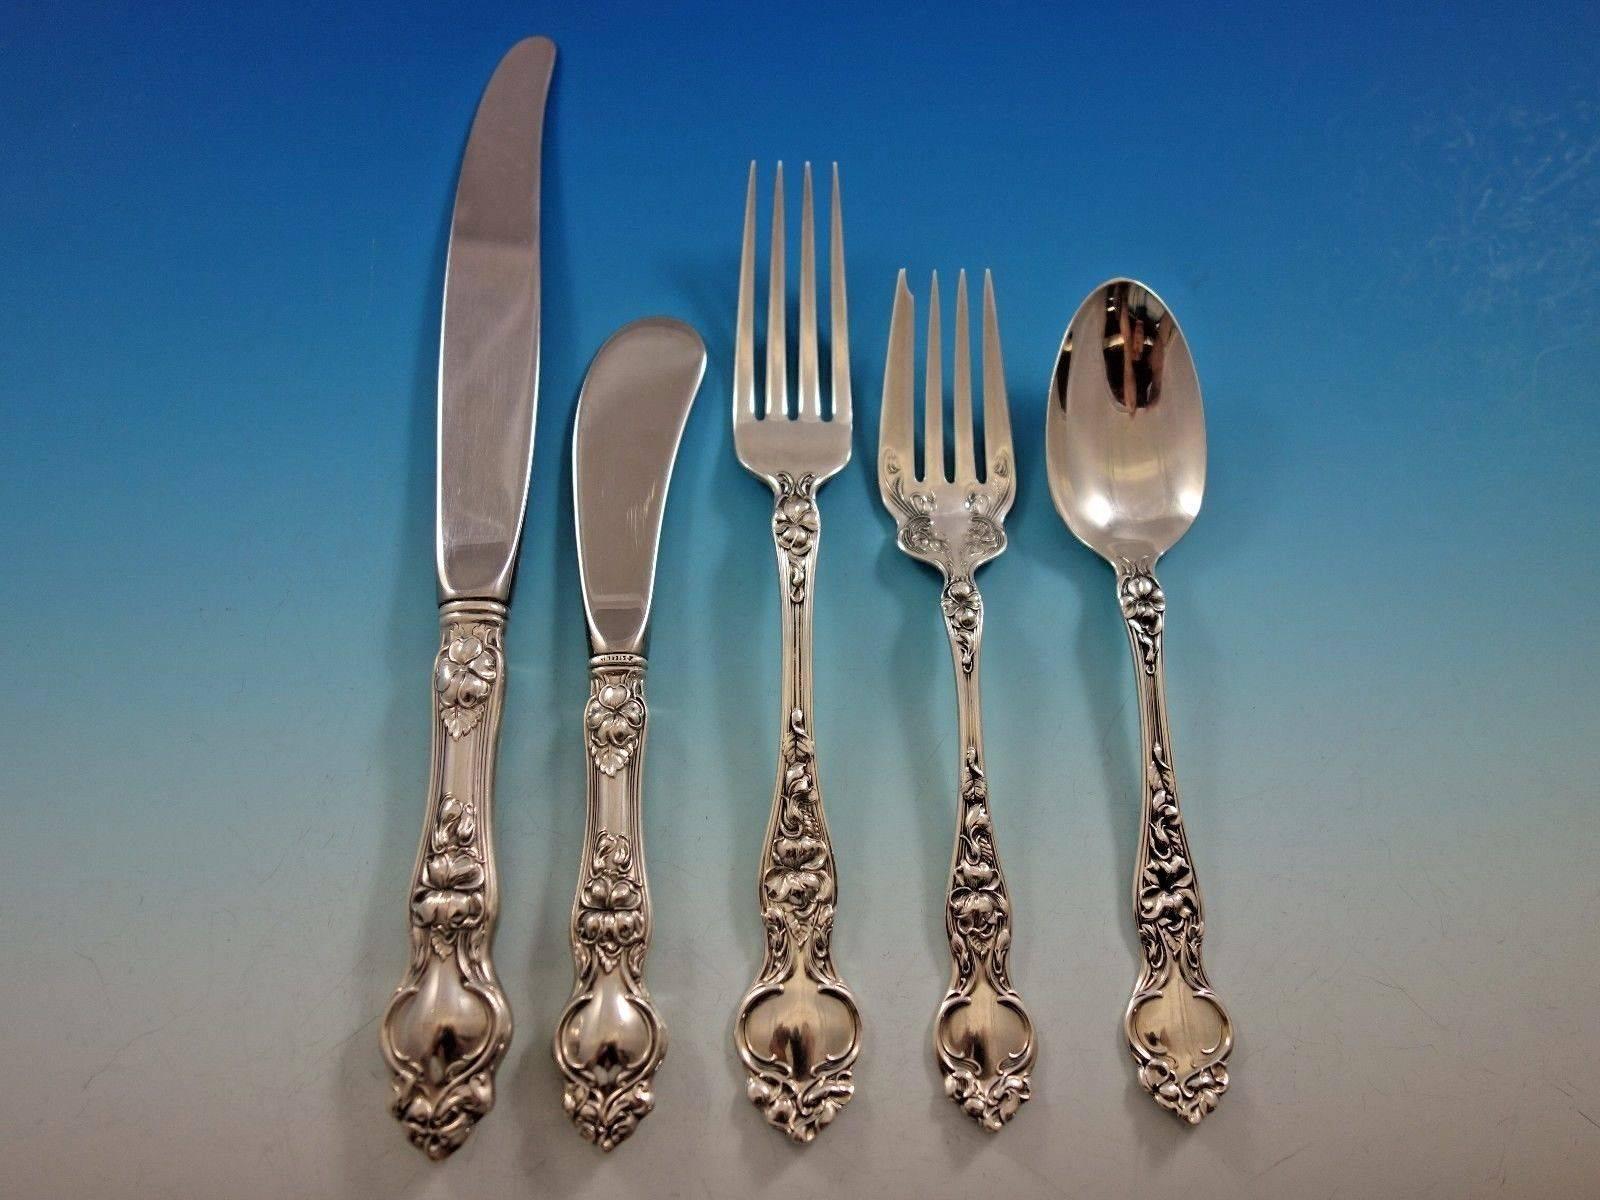 Violet by Wallace sterling silver flatware set of 30 pieces. Great starter set! This set includes: 

Six knives, 8 7/8